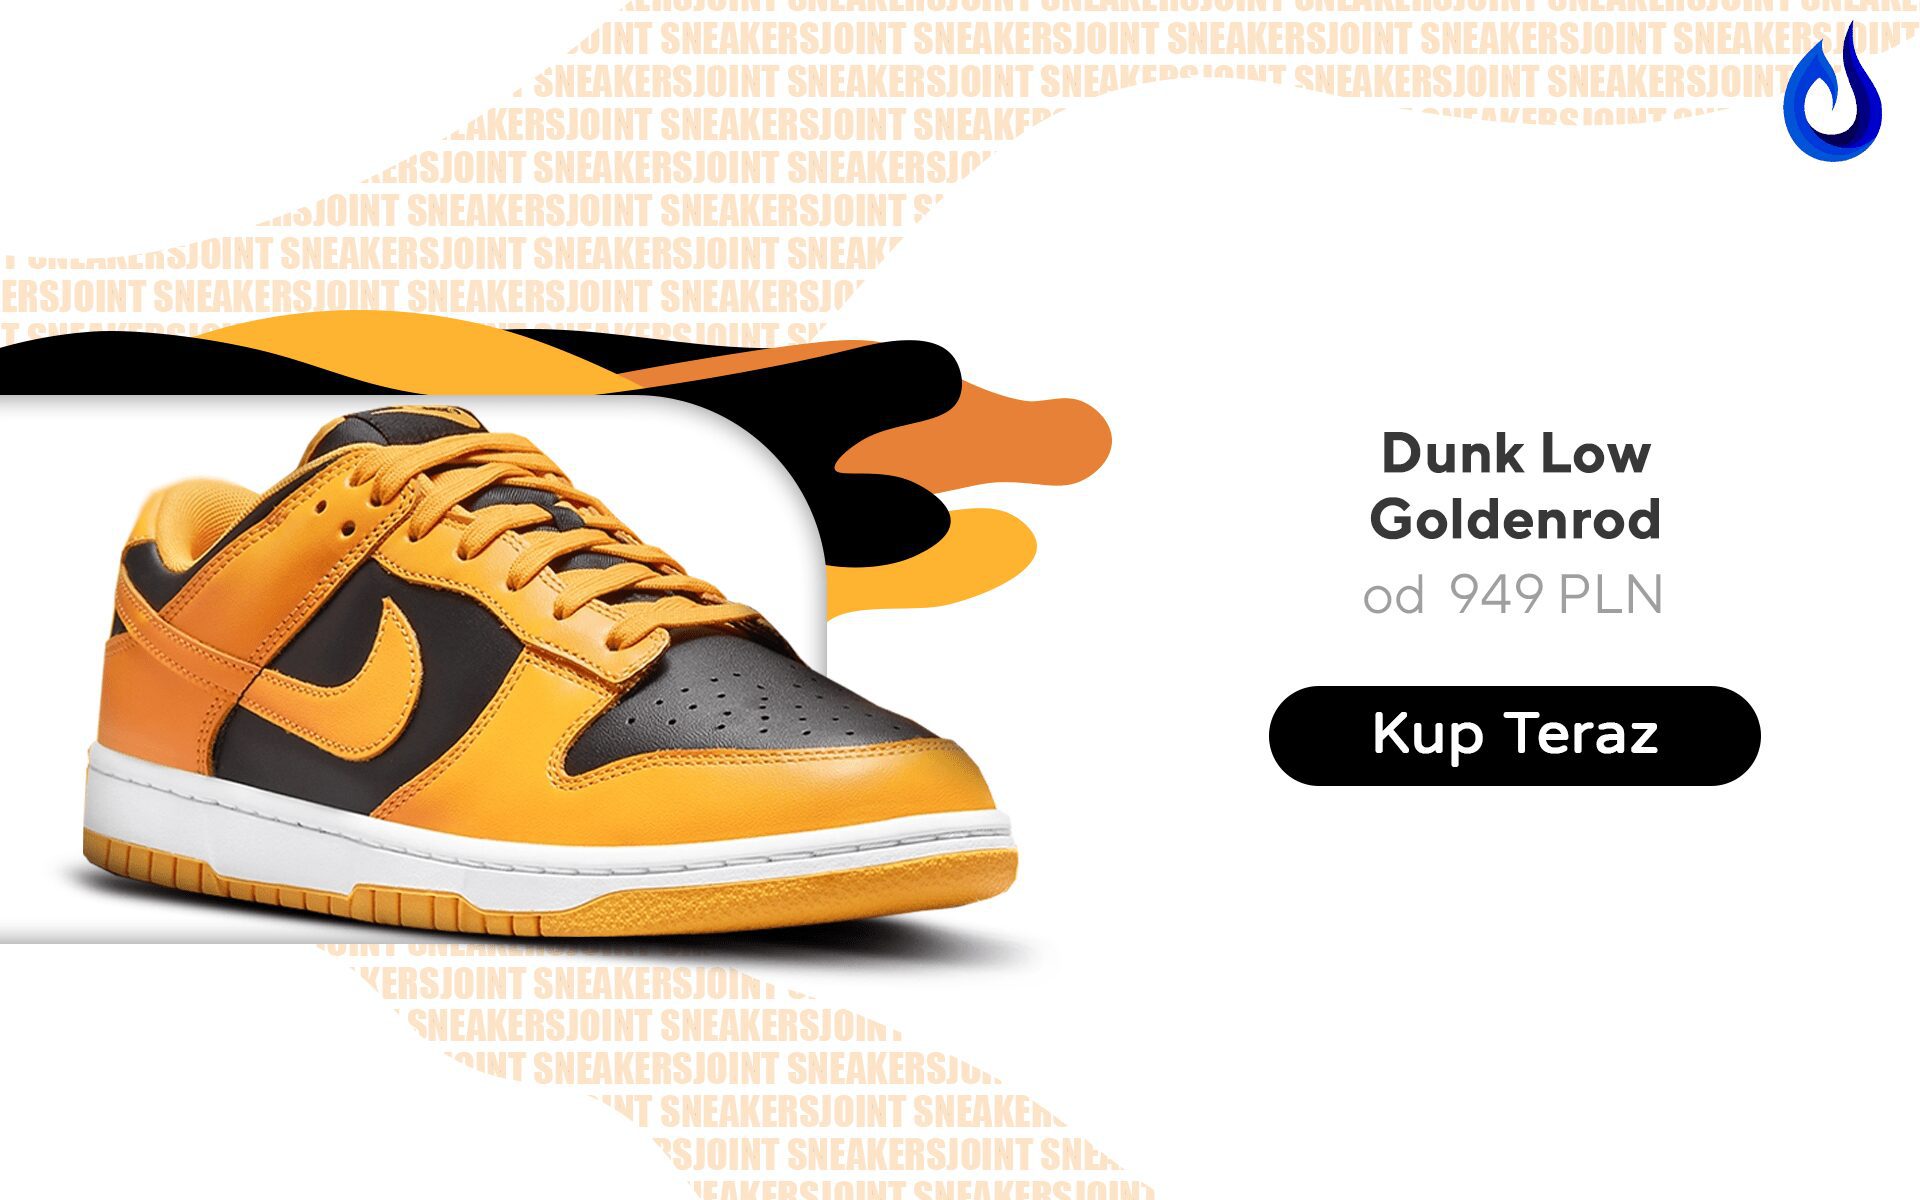 Nike Dunk Low Goldenrod - 7 Sneaker Suggestions for Spring